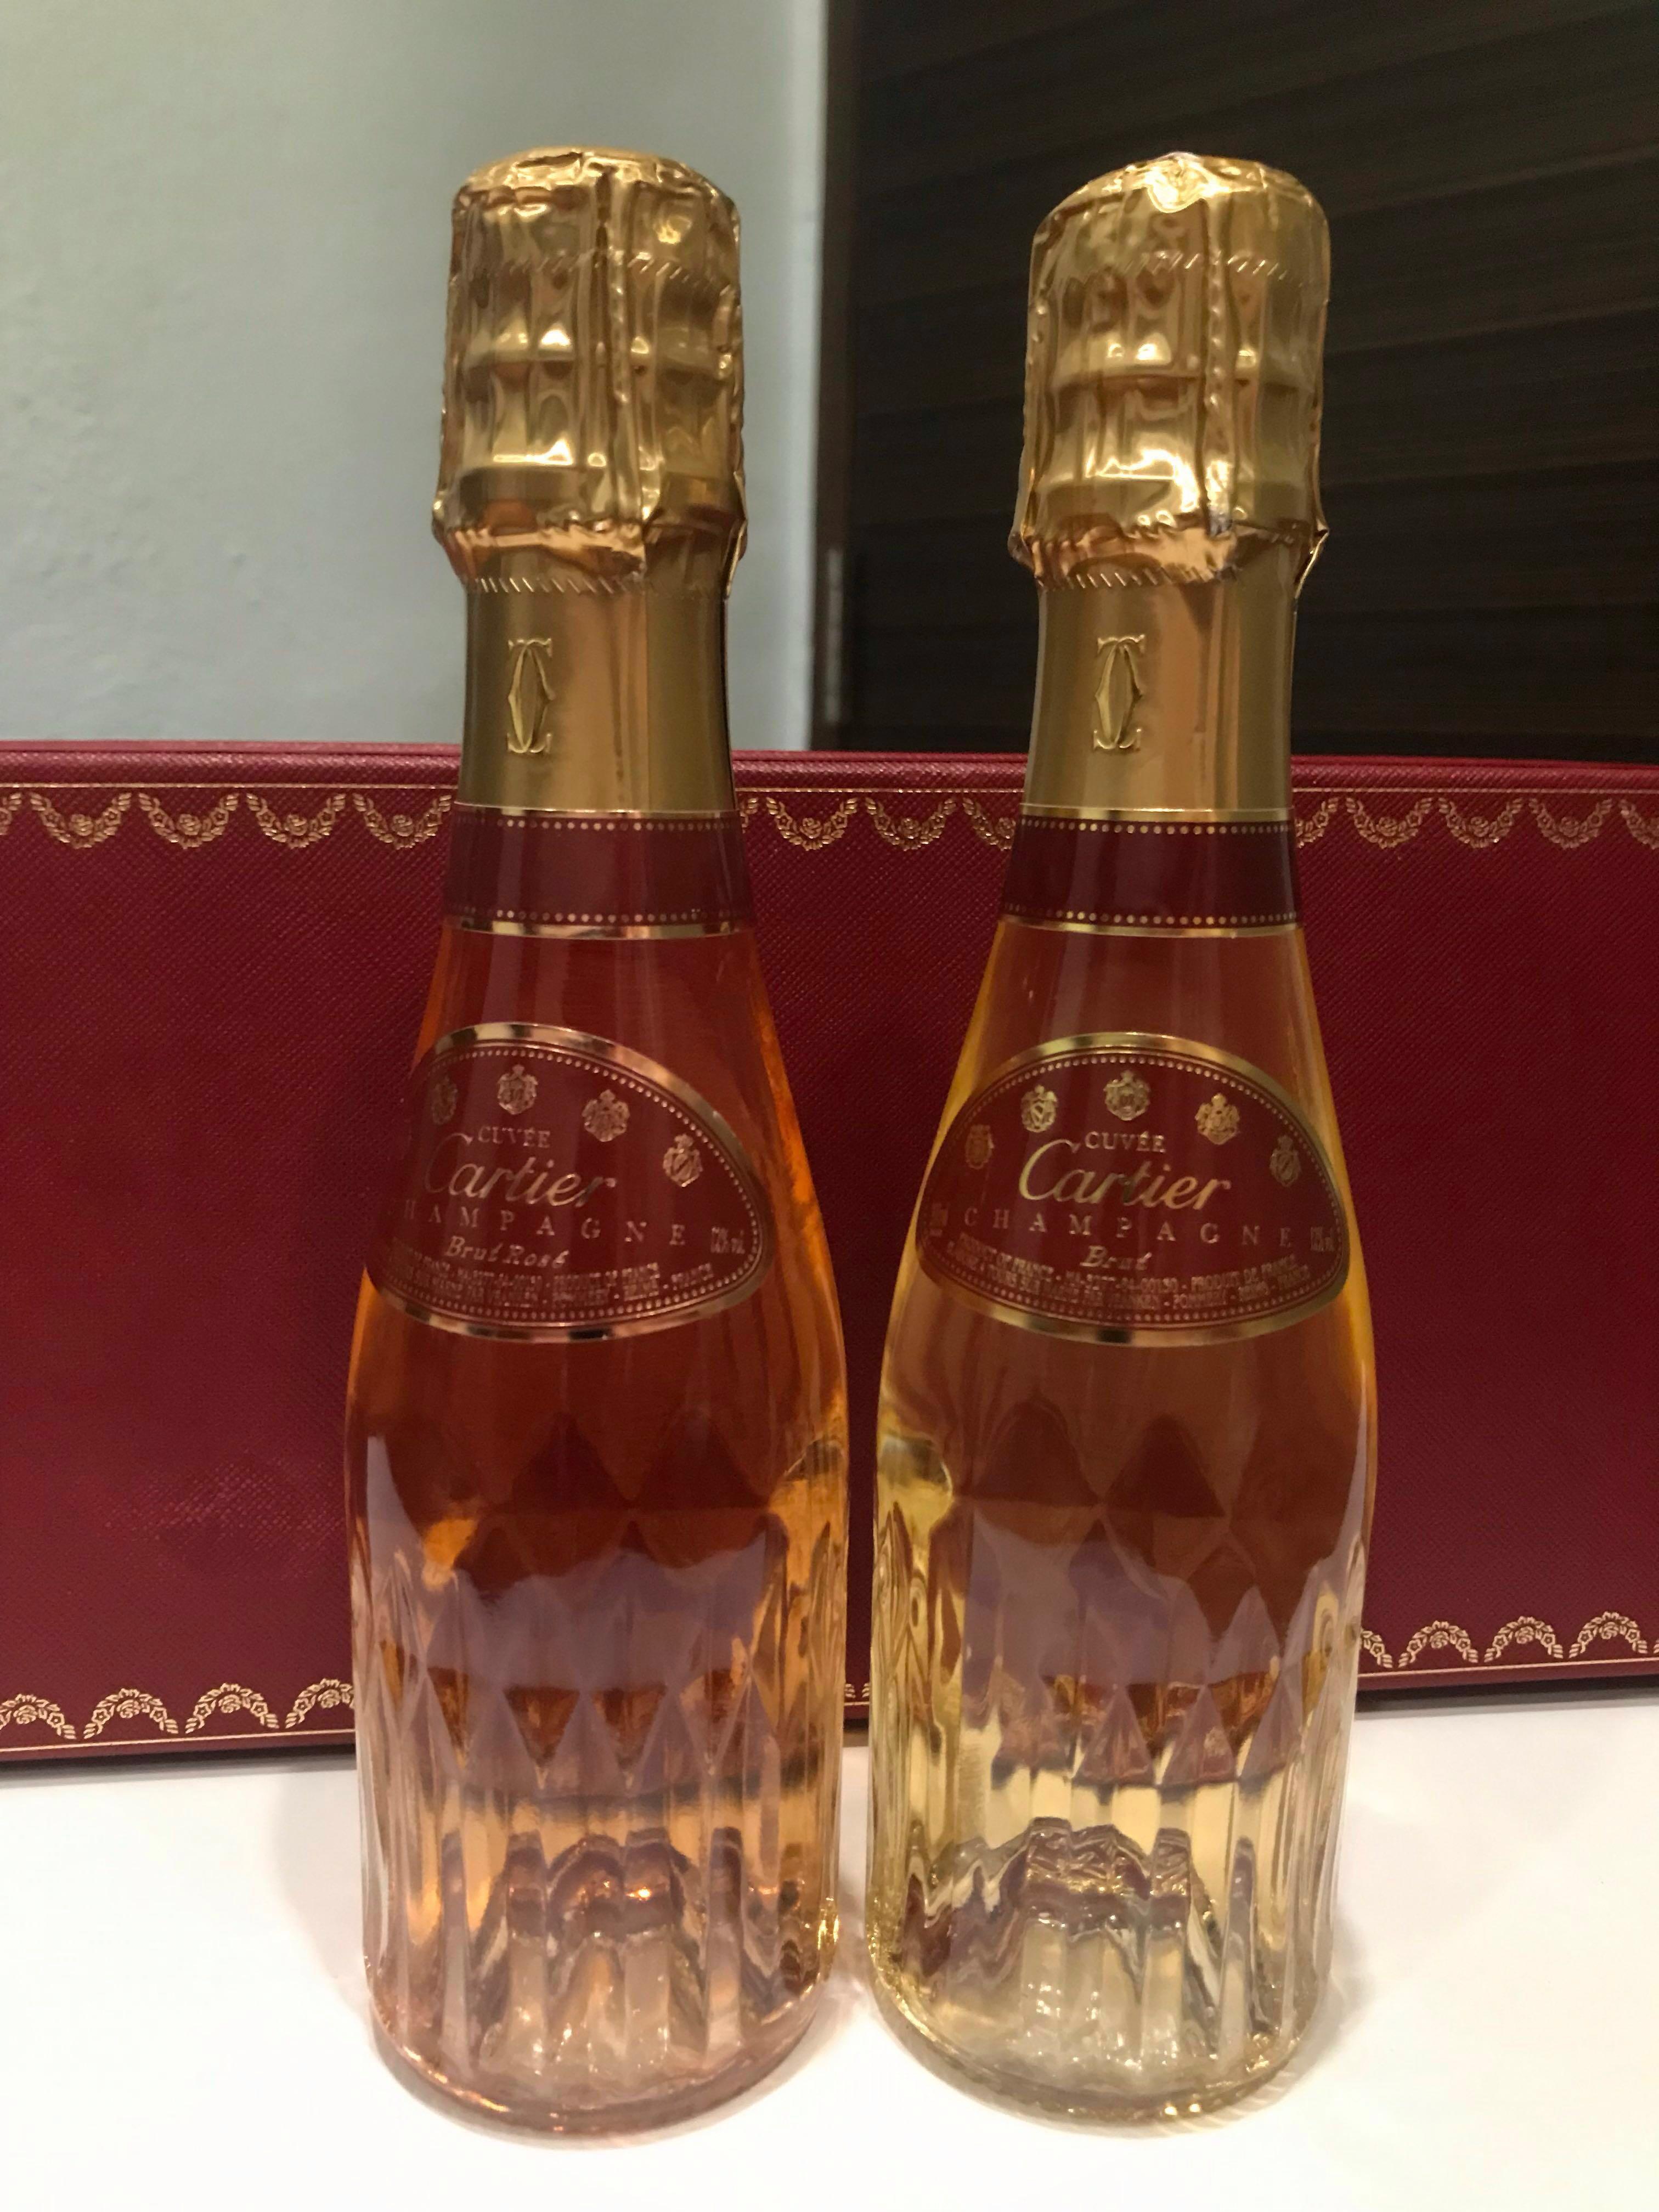 cartier champagne for sale